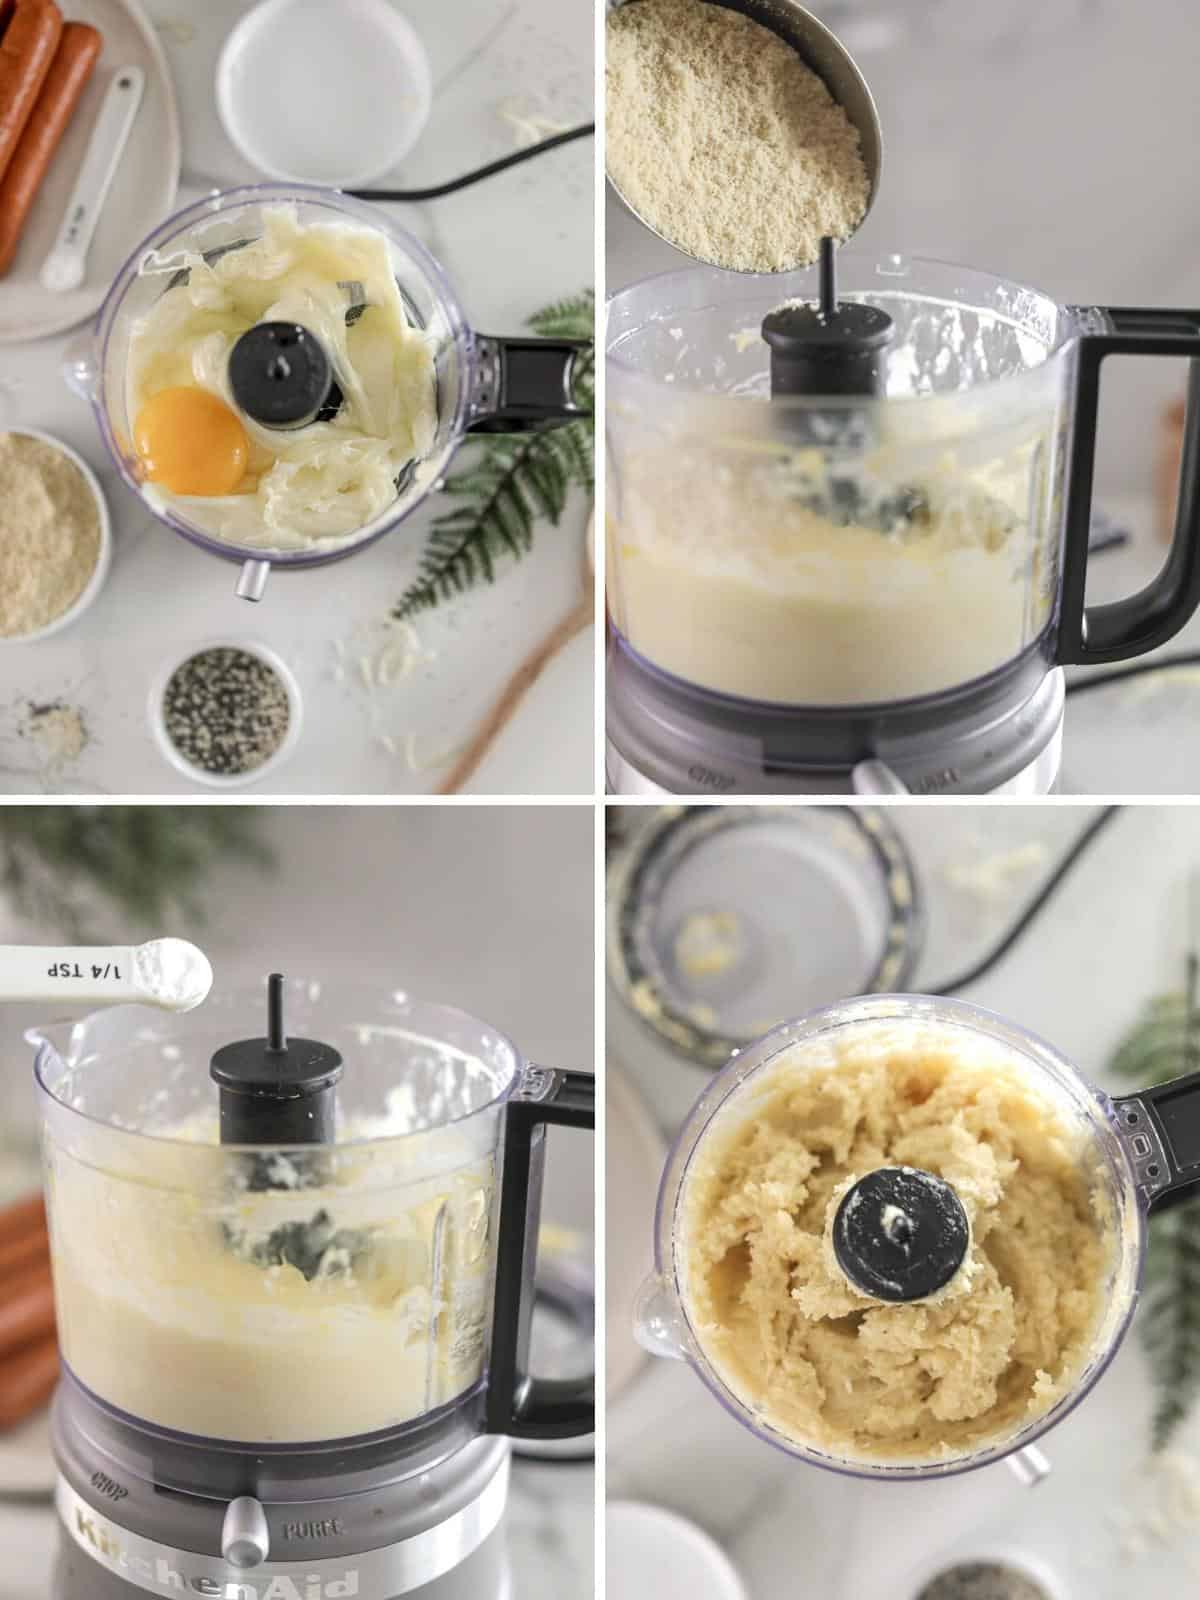 Collage image showing making cheese and almond flour dough in food processor.